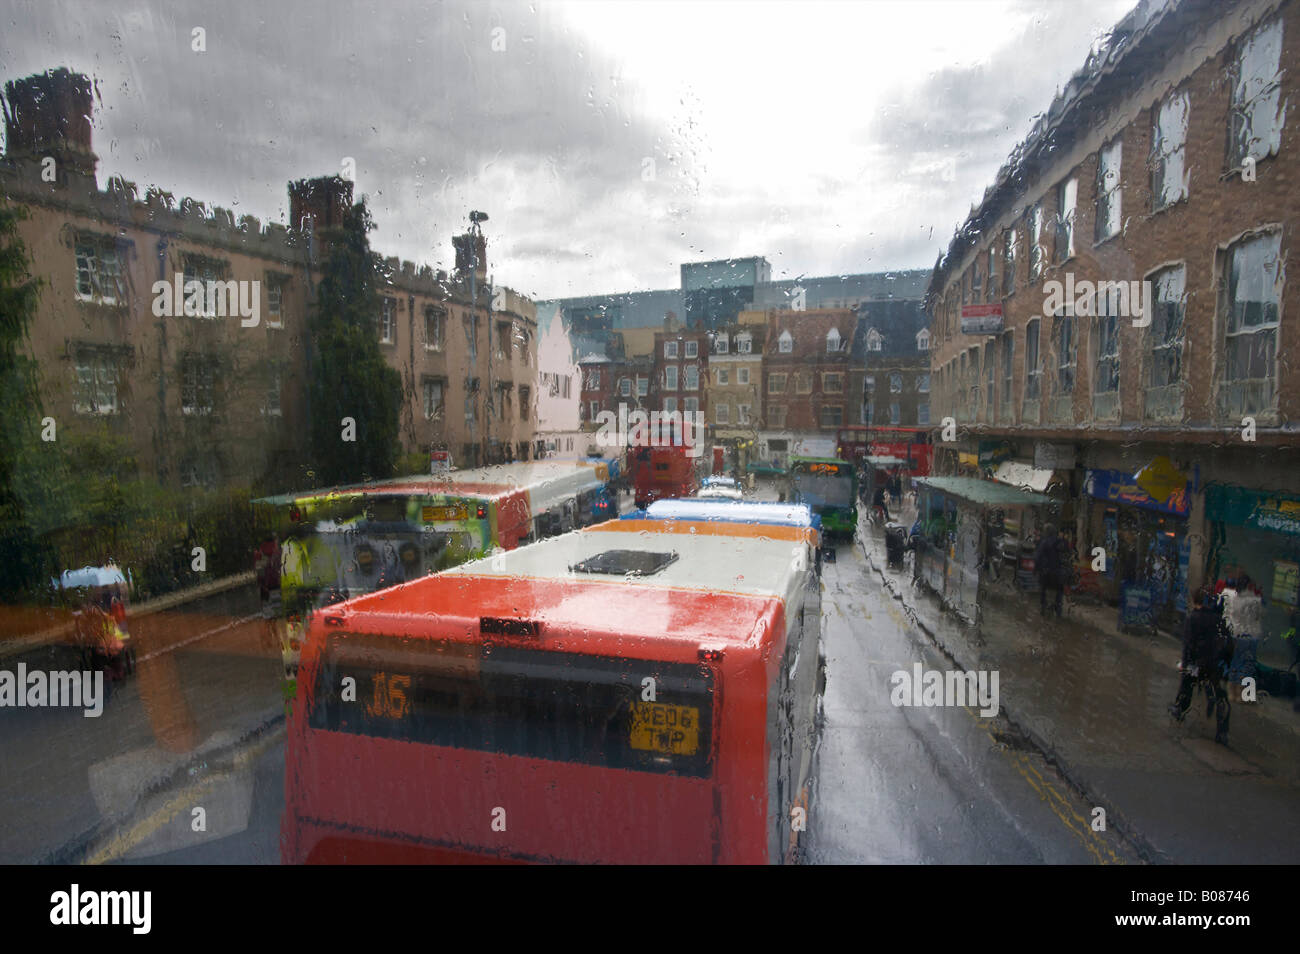 View from Double decker Bus Stock Photo